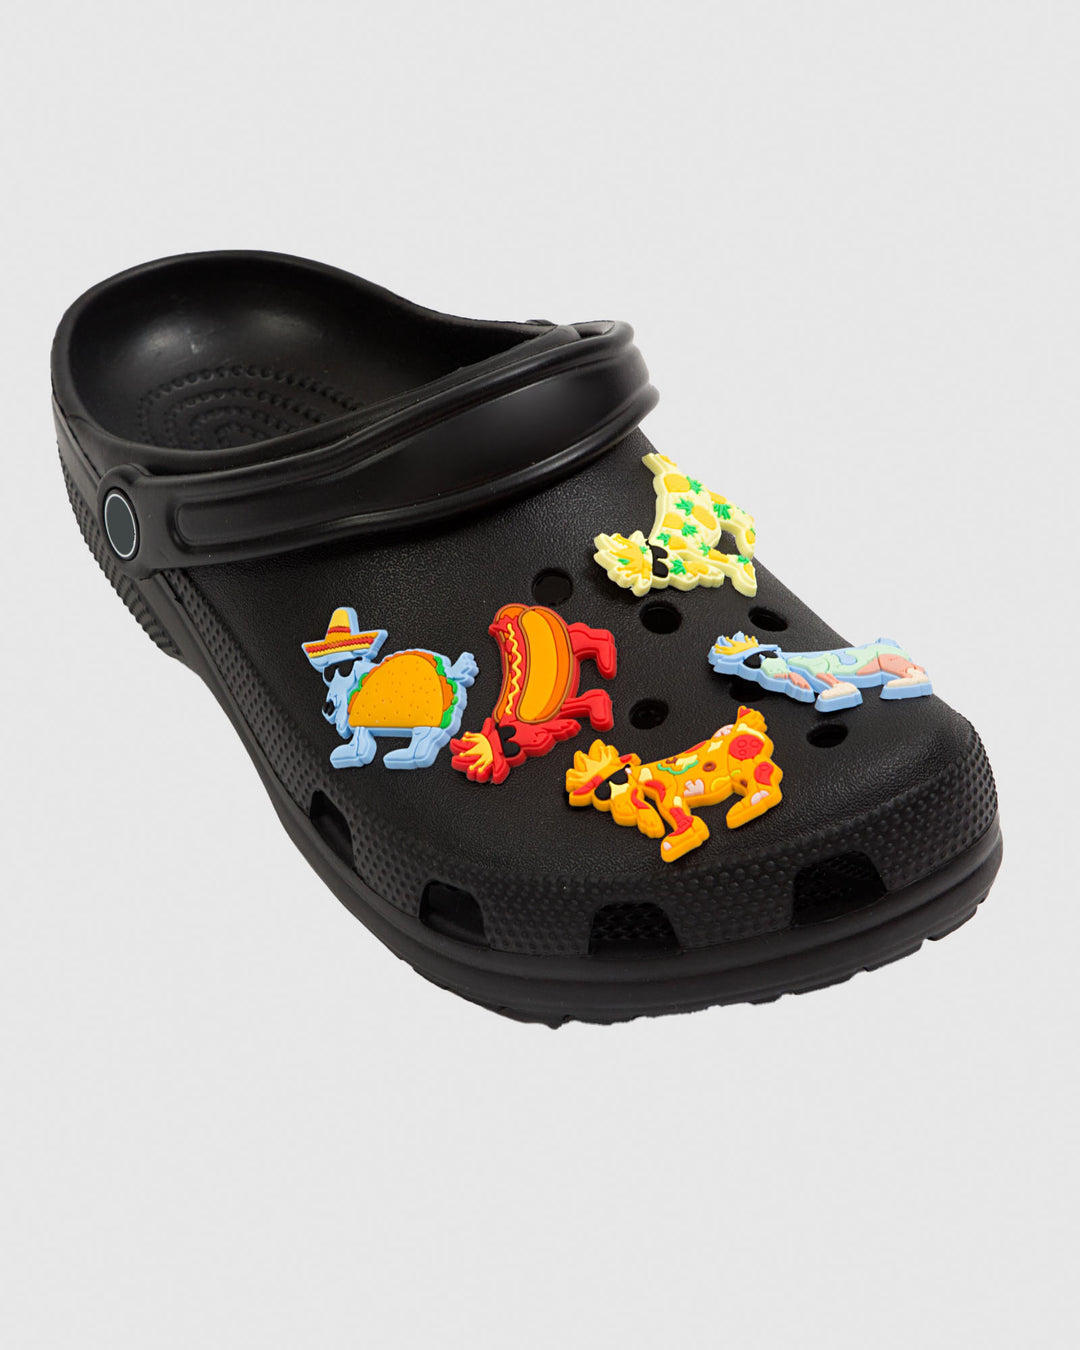 Black clog with colorful food-inspired shoe charms#style_food